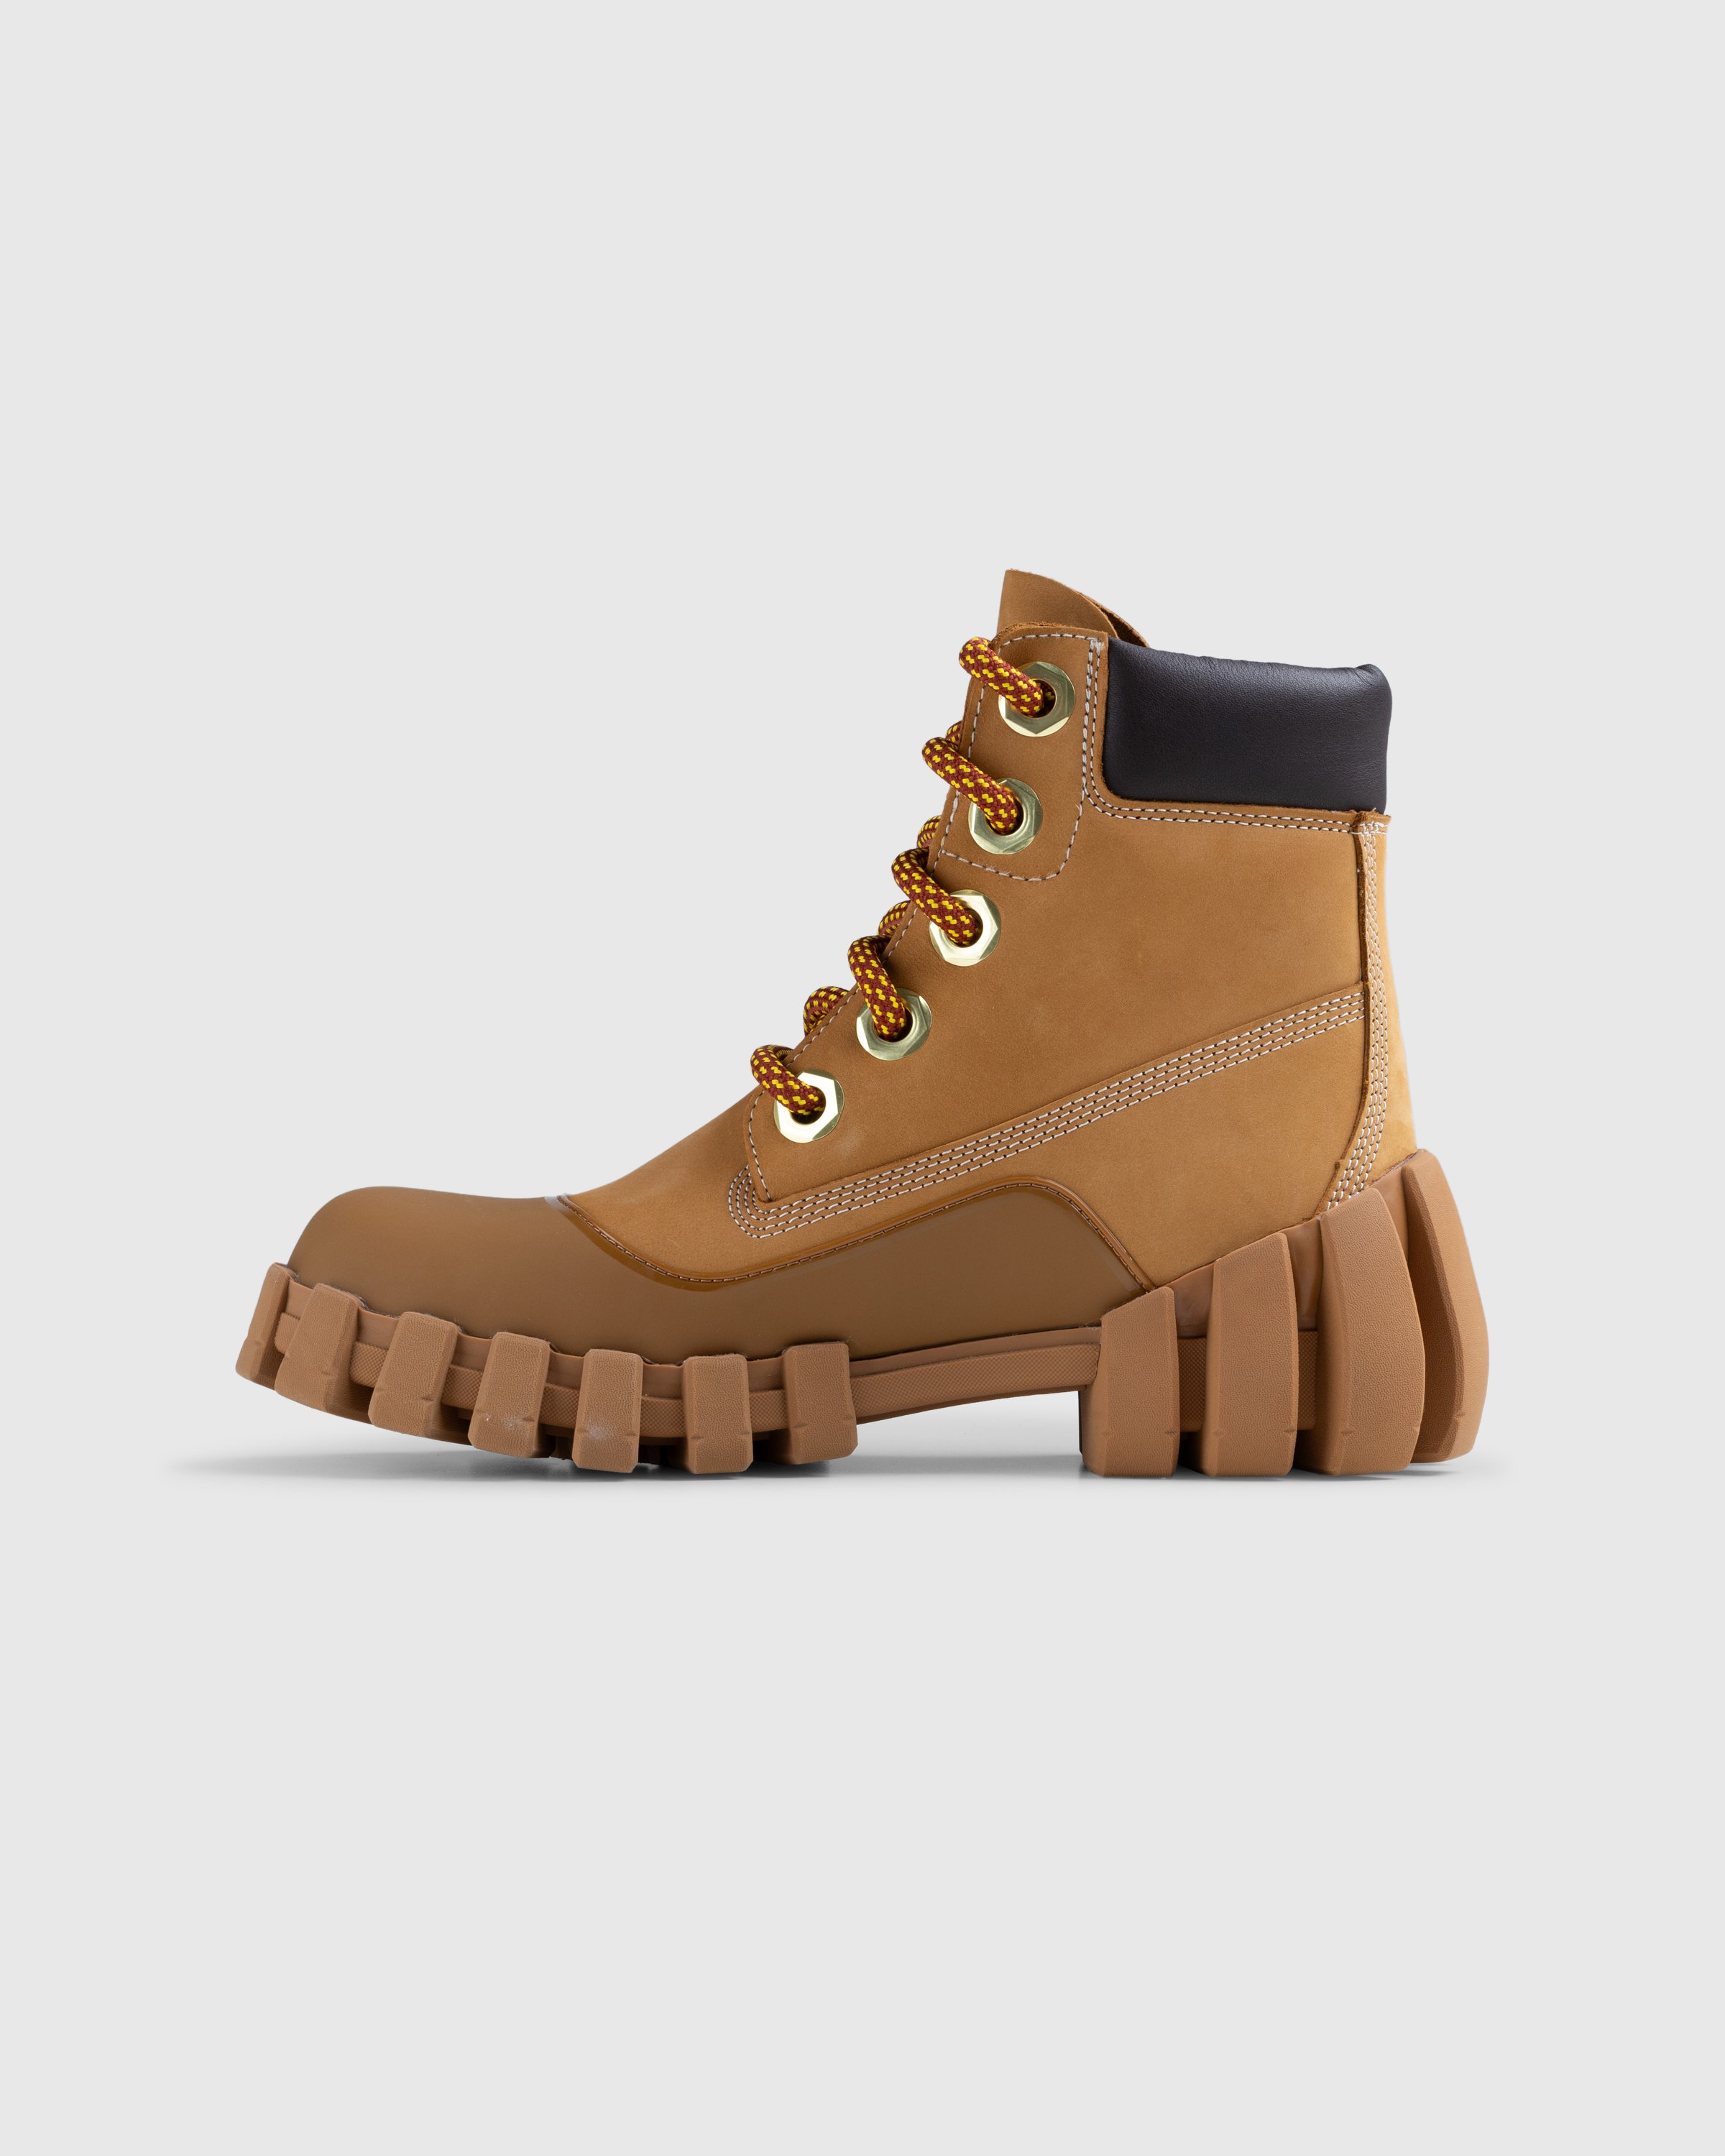 Timberland x Humberto Leon - 6 INCH LACE UP BOOT WHEAT - Footwear - Beige - Image 2